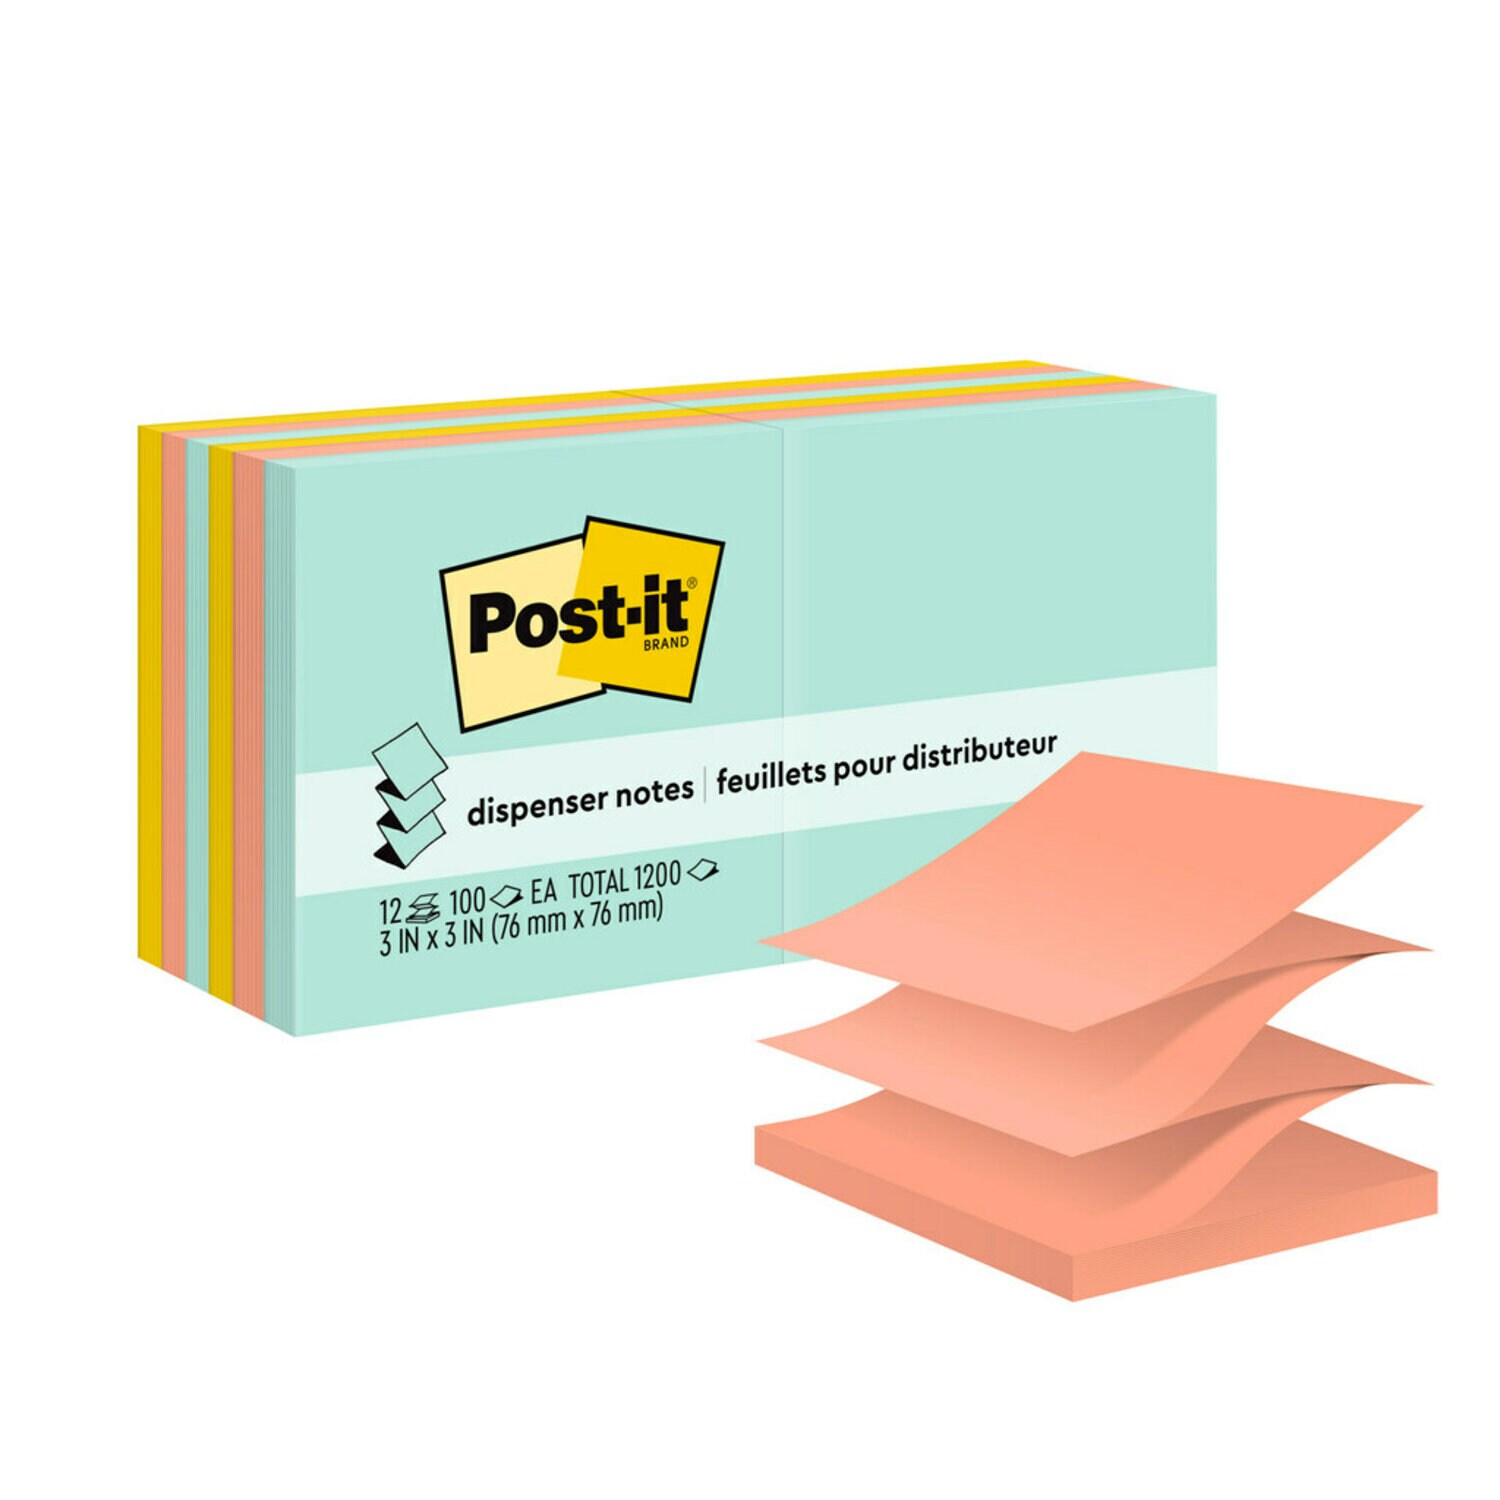 7100086916 - Post-it Dispenser Pop-up Notes R330-12AP, 3 in x 3 in, Beachside Cafe